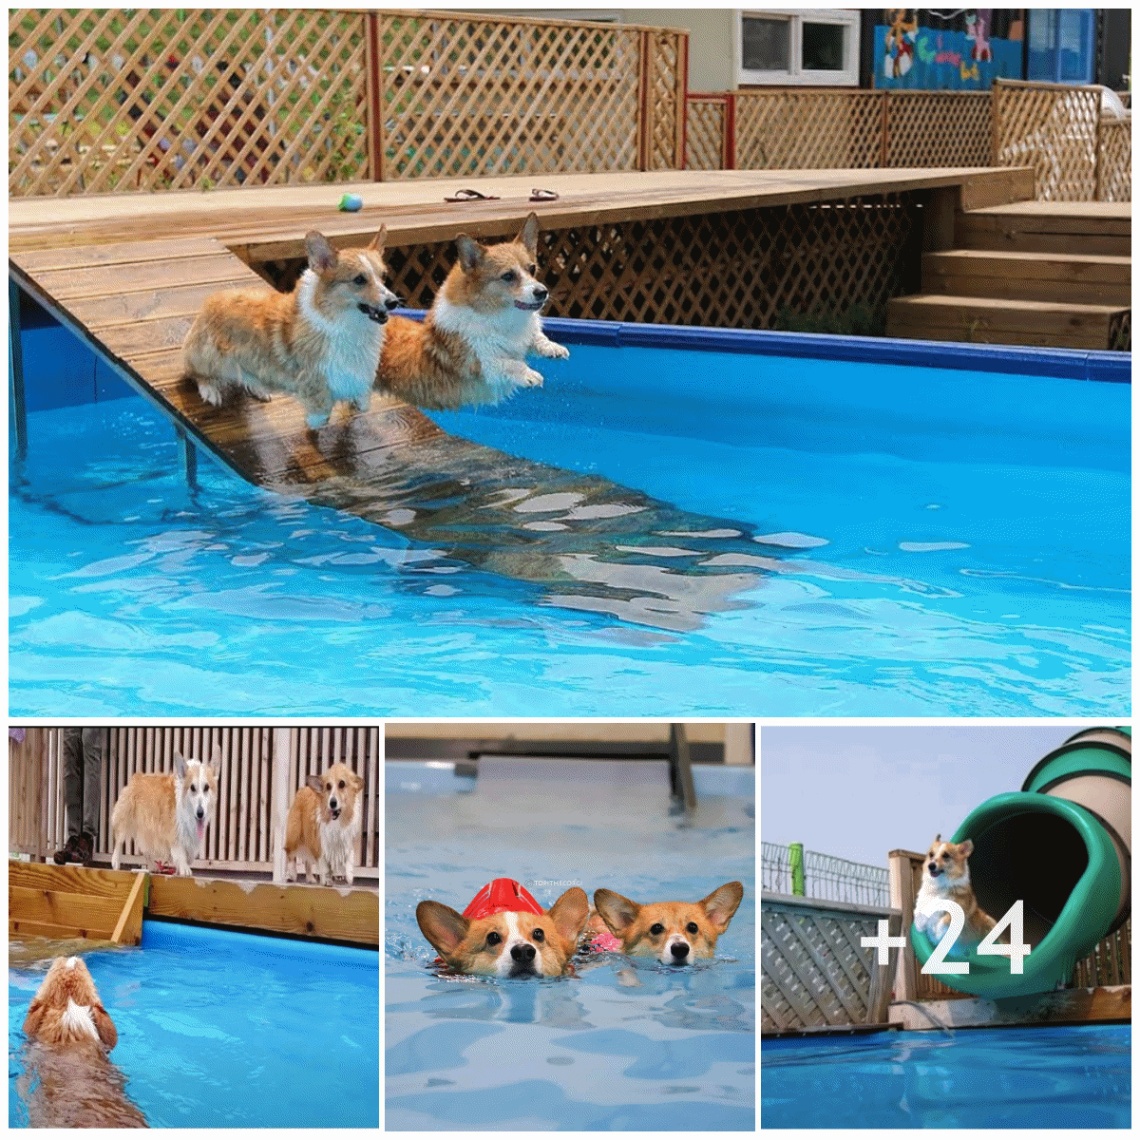 “Corgi Pool Party: Dogs enjoy fun adventures with splashes and water slides”